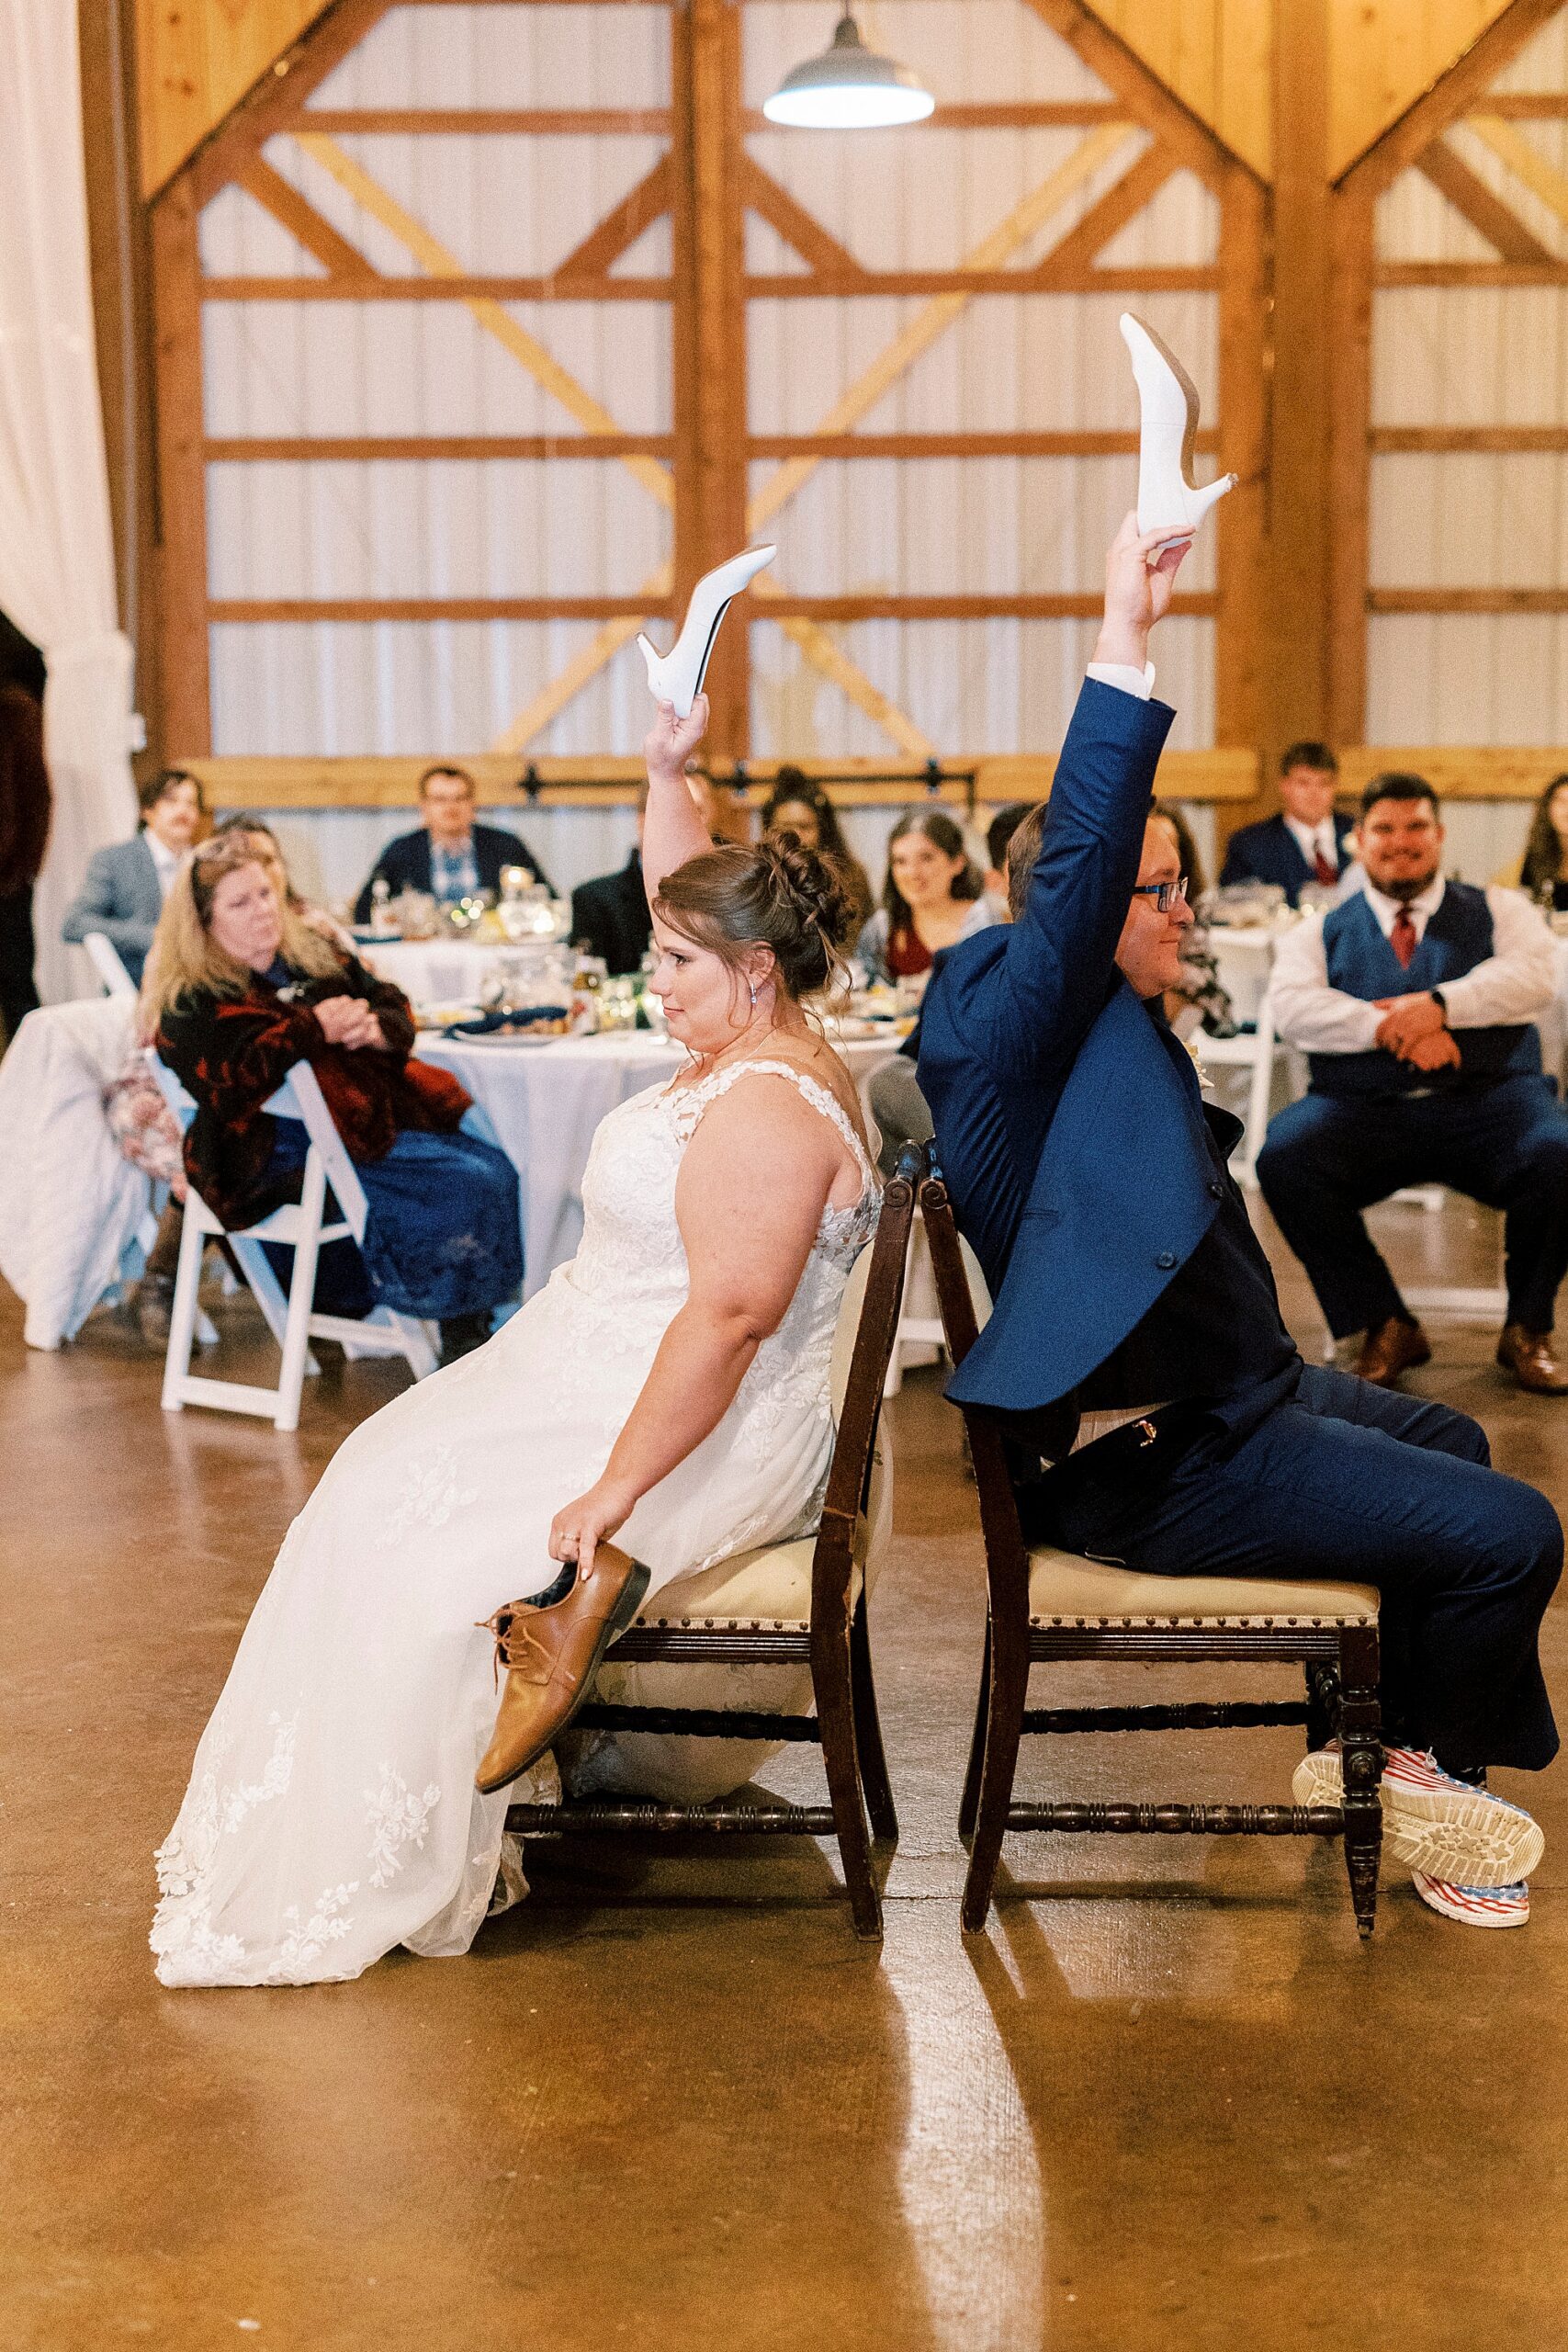 bride and groom play the shoe game during barn wedding reception at the Farm at Brusharbor